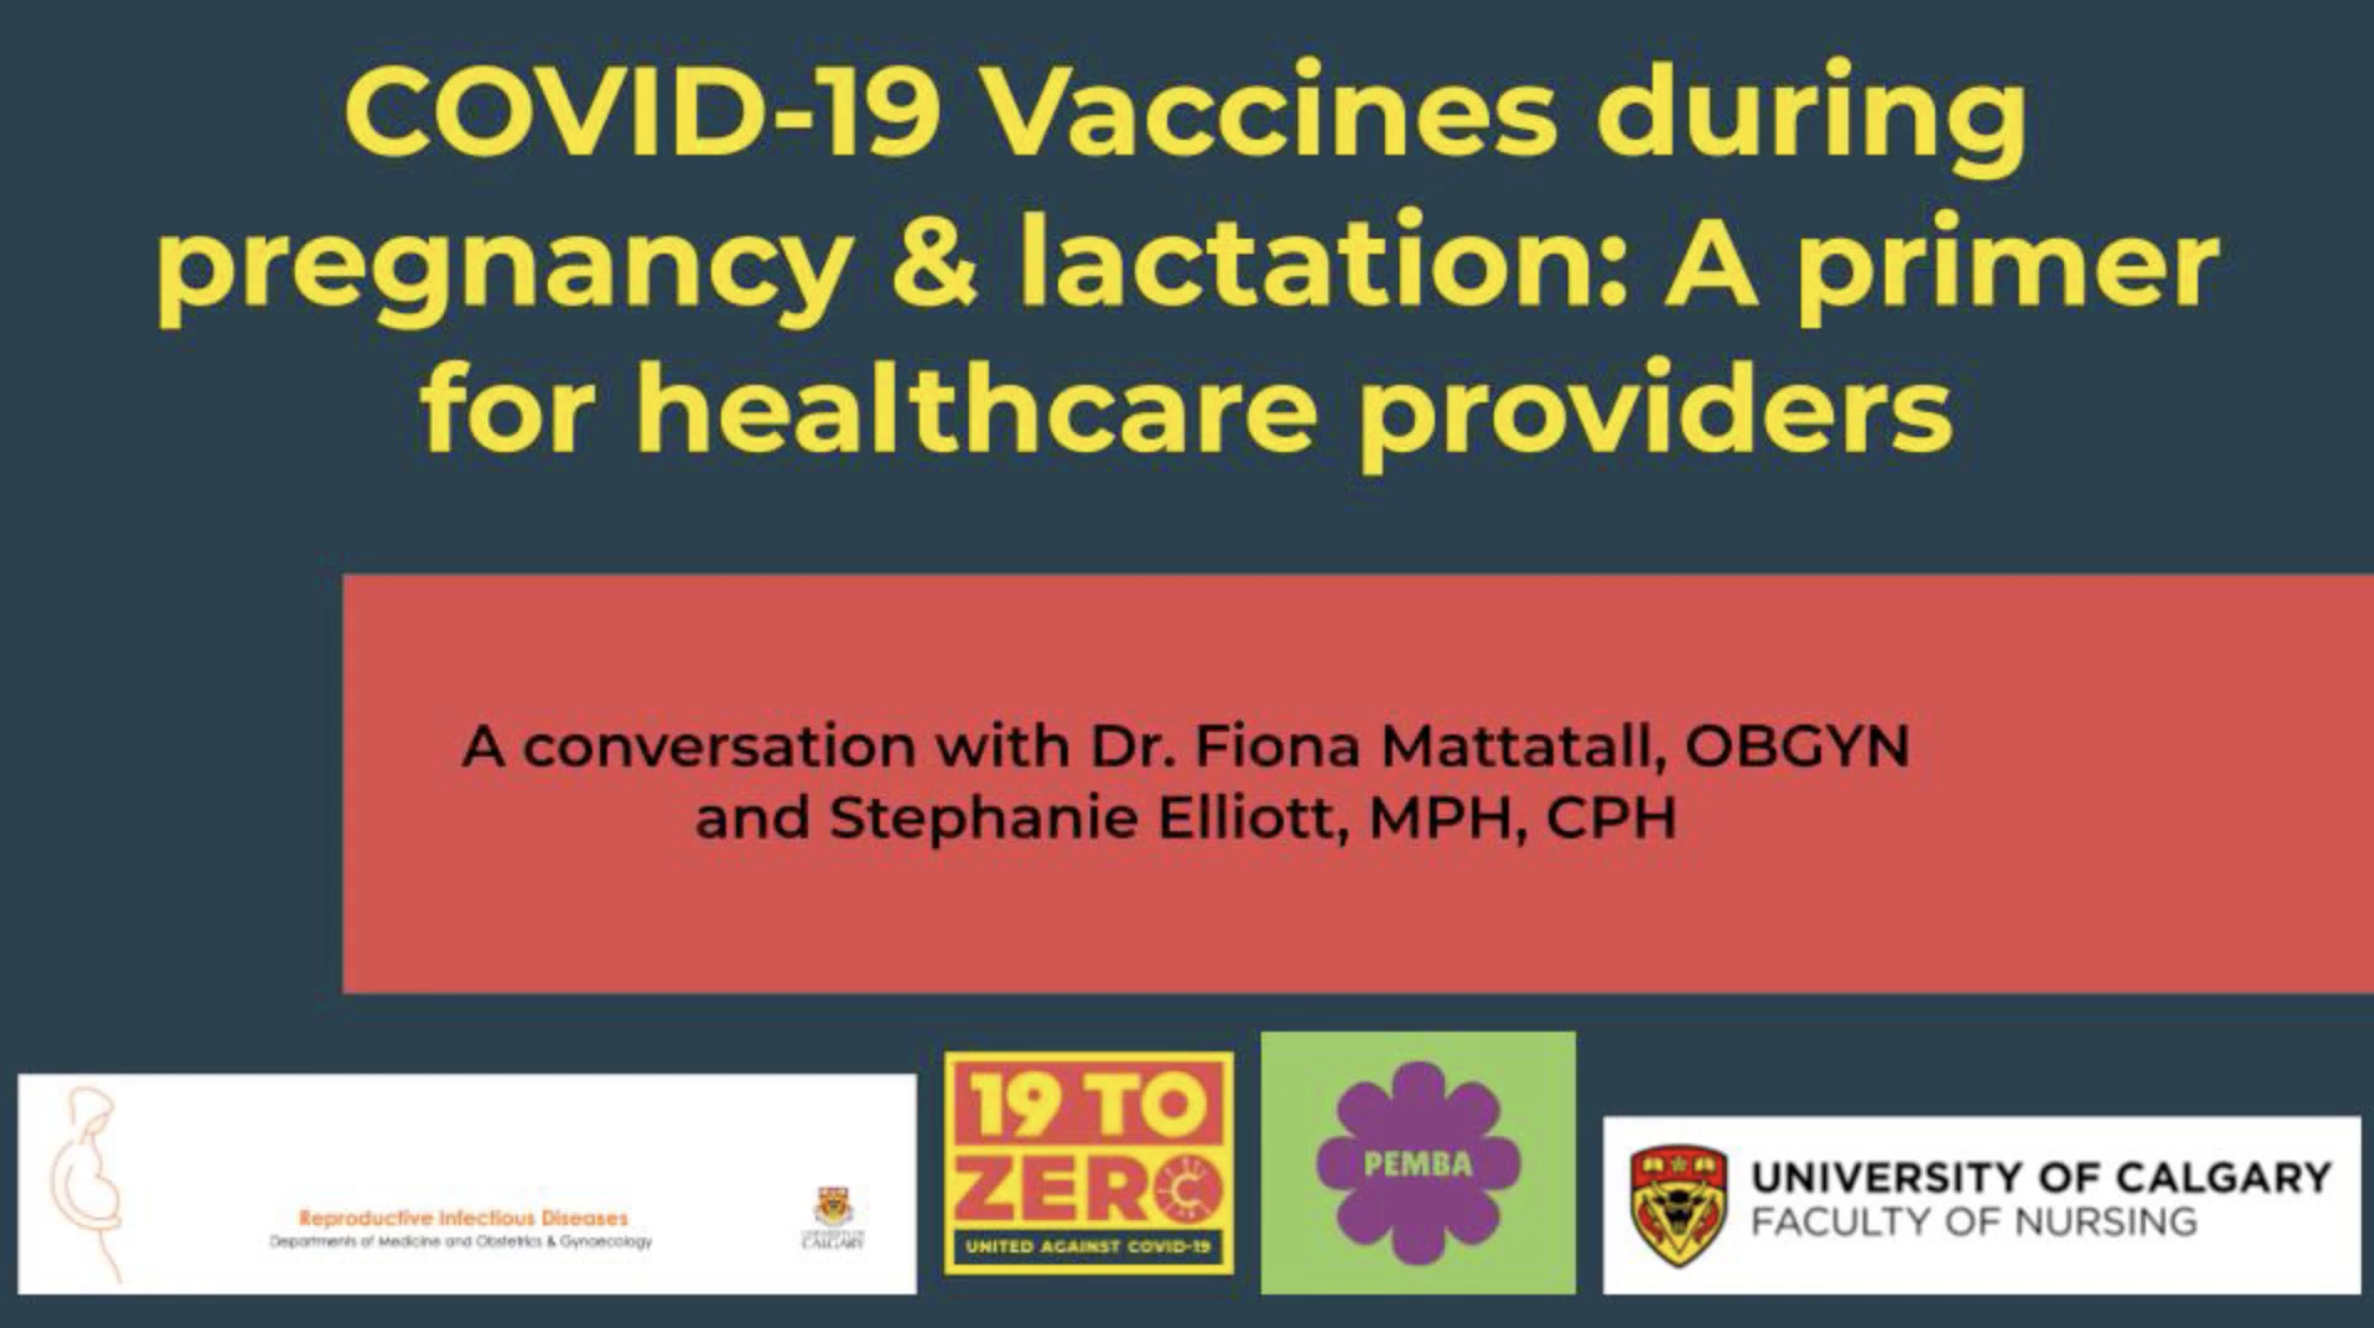 COVID-19 Vaccines During Pregnancy & Lactation: A Primer for Healthcare Providers